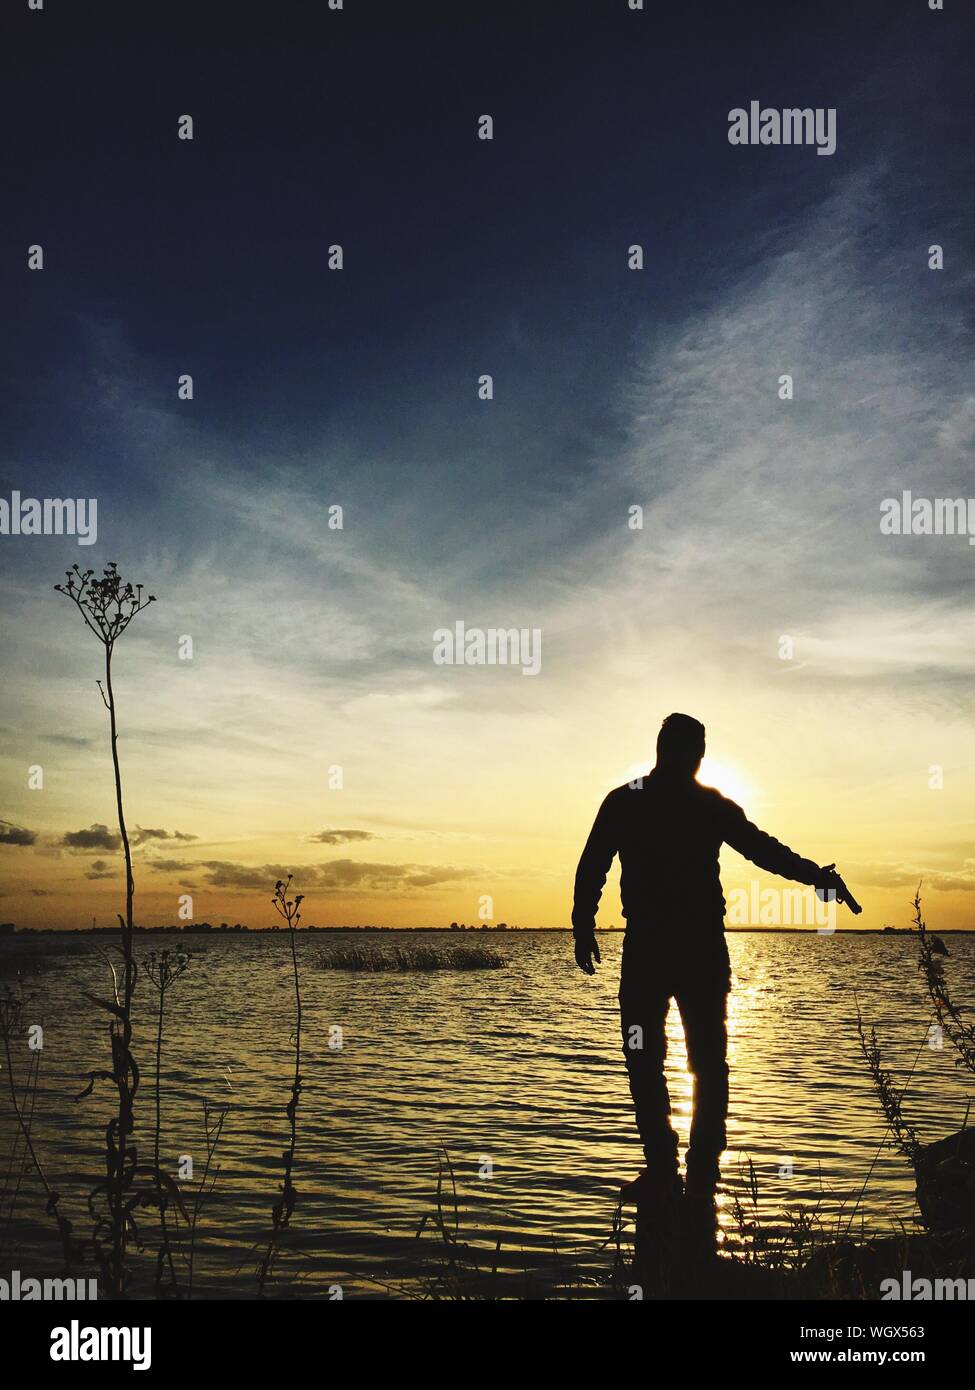 Rear View Of Silhouette Man Holding Gun In Sea Against Sky During Sunset Stock Photo